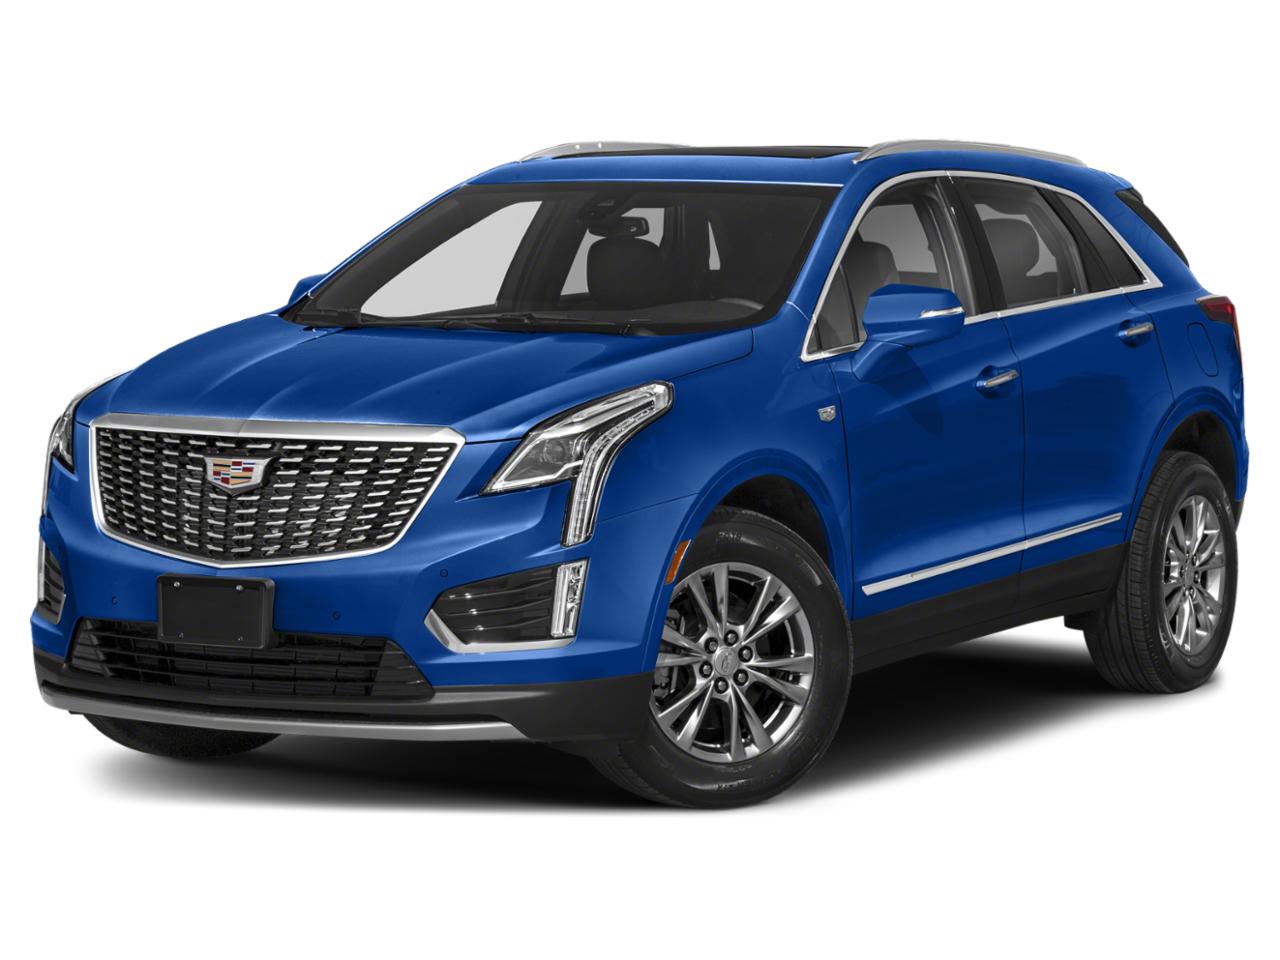 DALLAS Models for Sale at Sewell Cadillac of Dallas